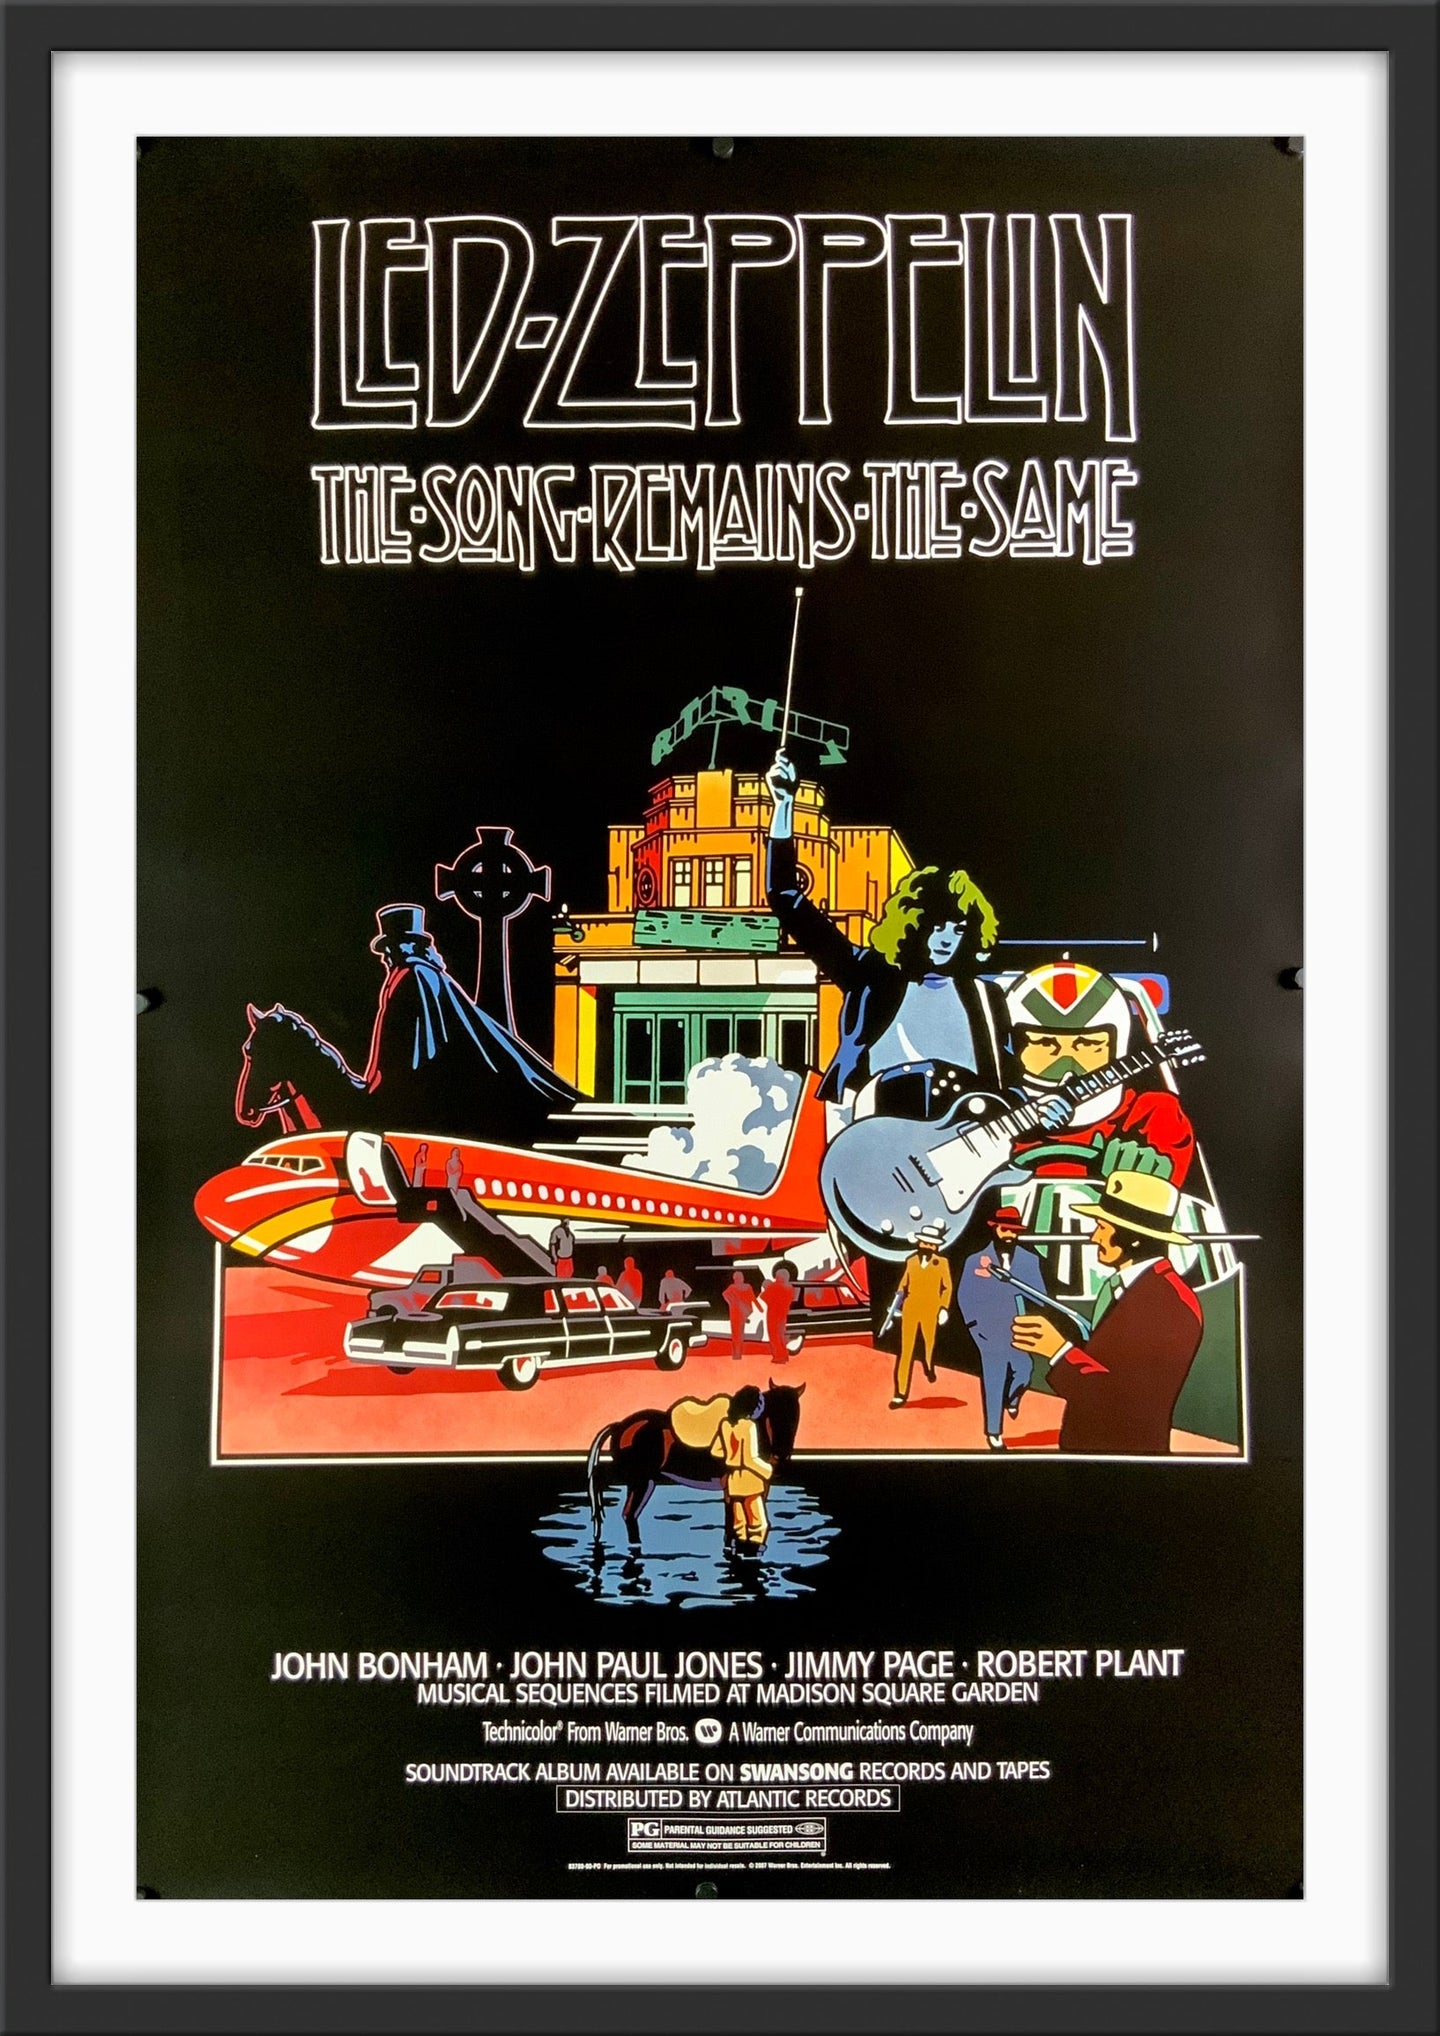 An original movie poster for the Led Zeppelin film The Song Remains The Same